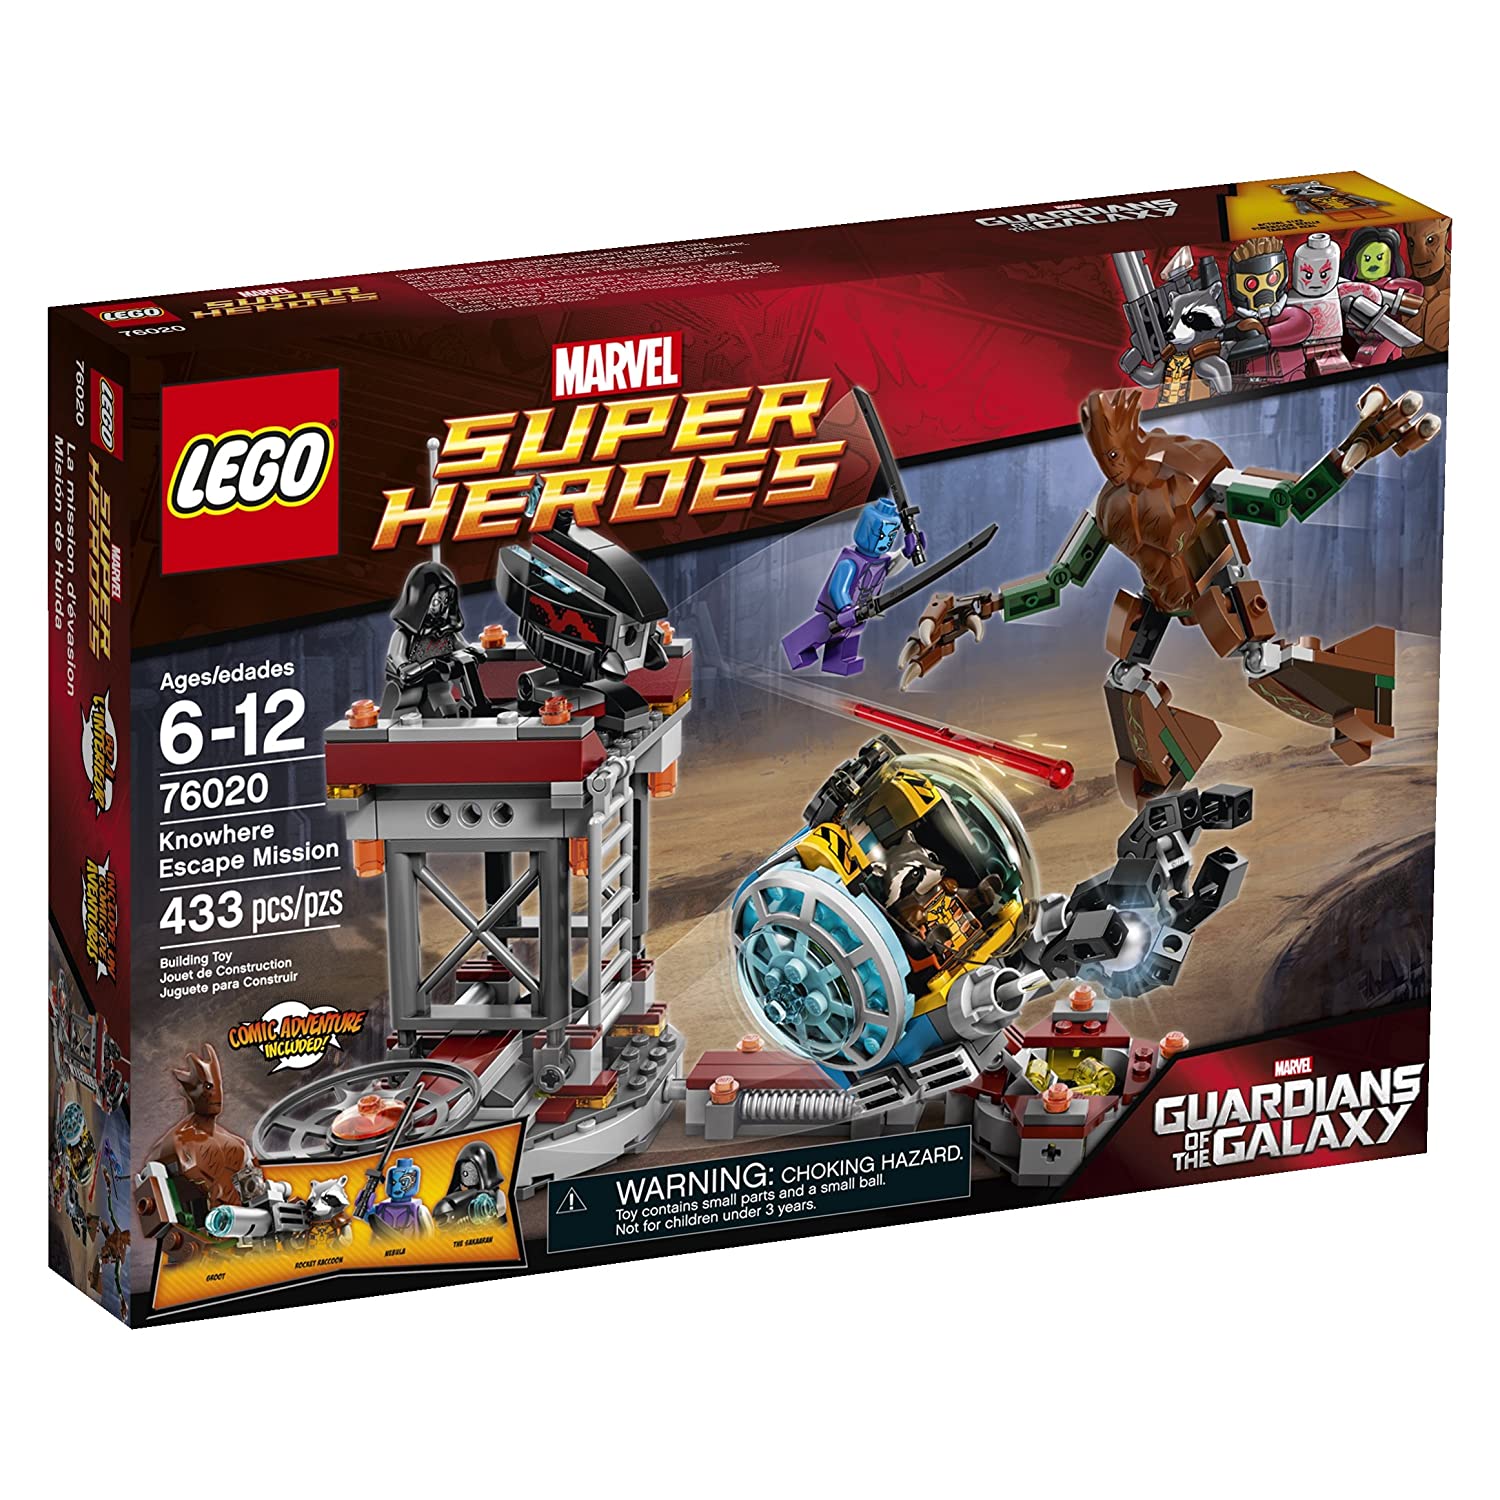 Top 7 Best LEGO Guardians of the Galaxy Sets Reviews in 2022 4